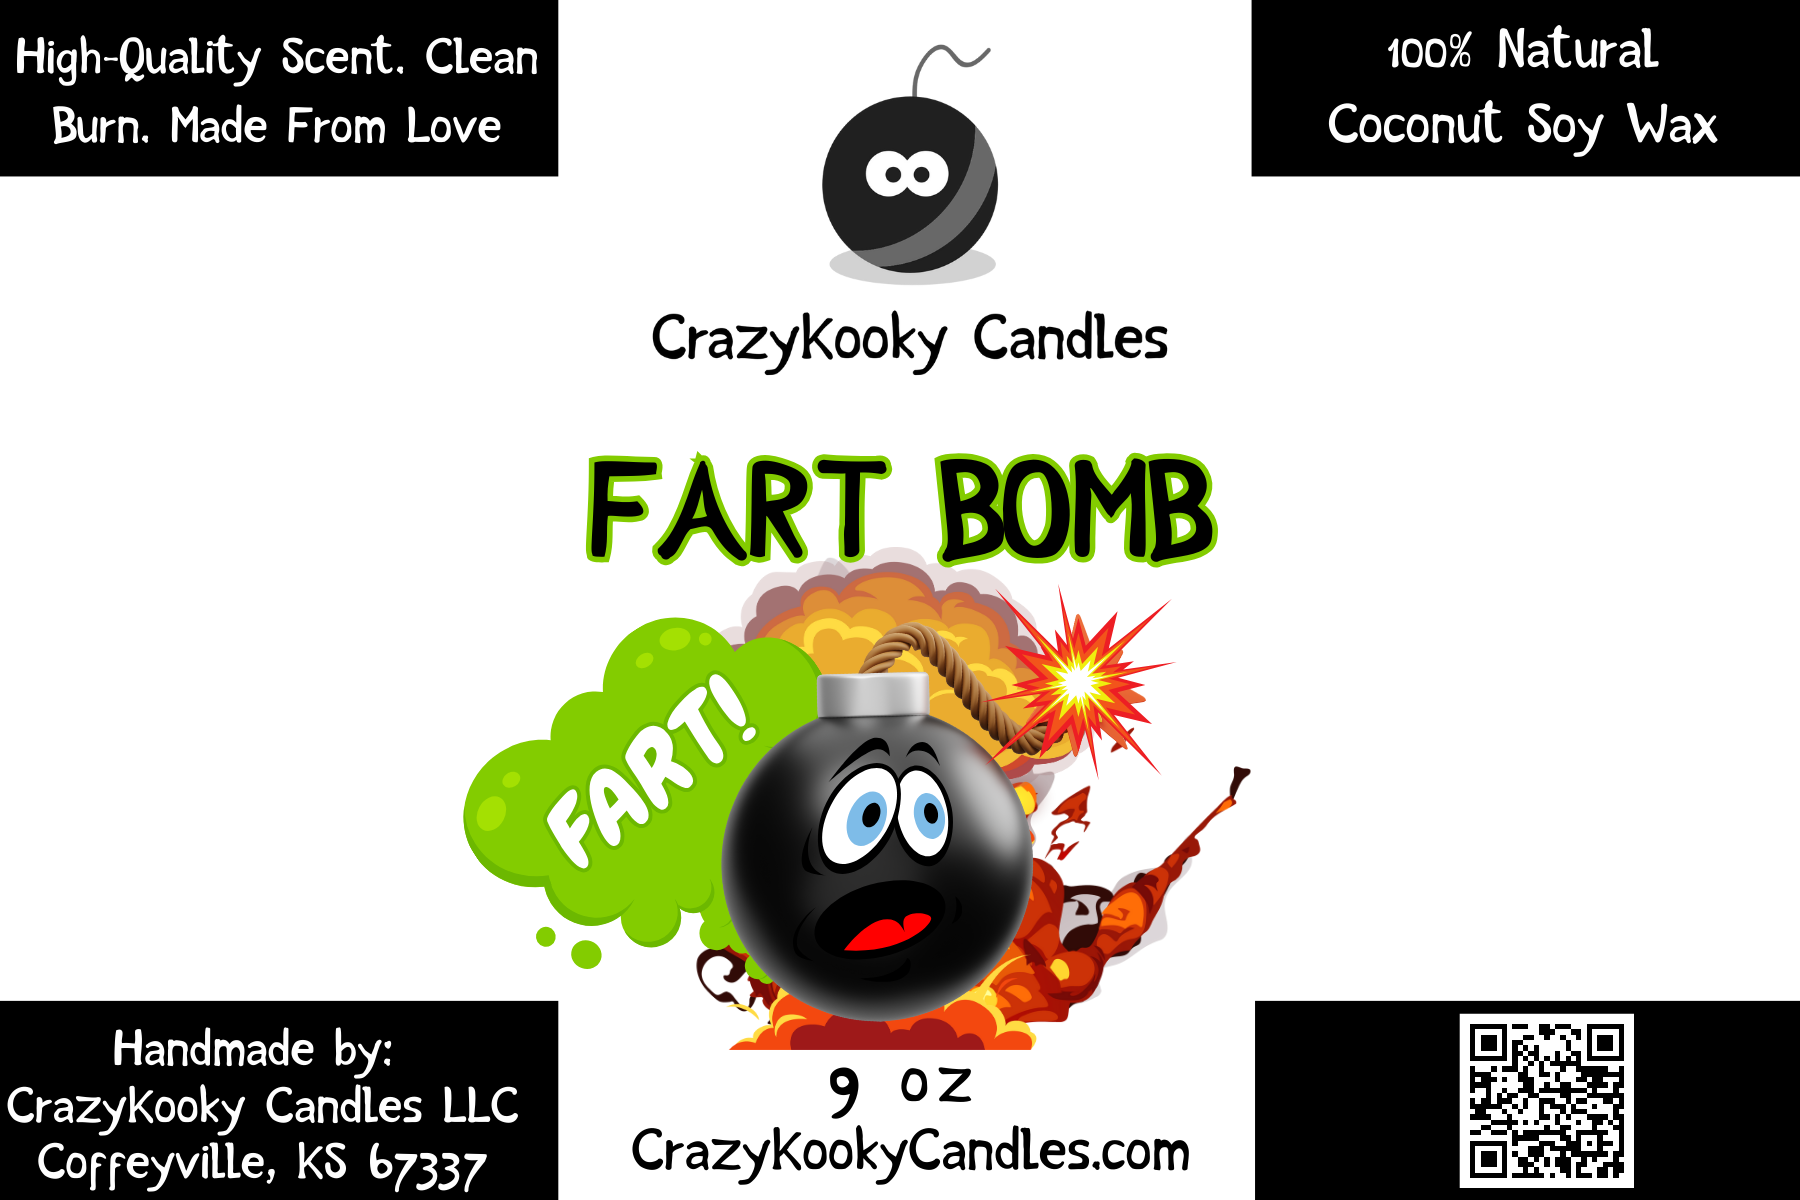 FART BOMB - Funny Candle, Scented Coconut Soy Candle, 9oz - CrazyKooky Candles LLC